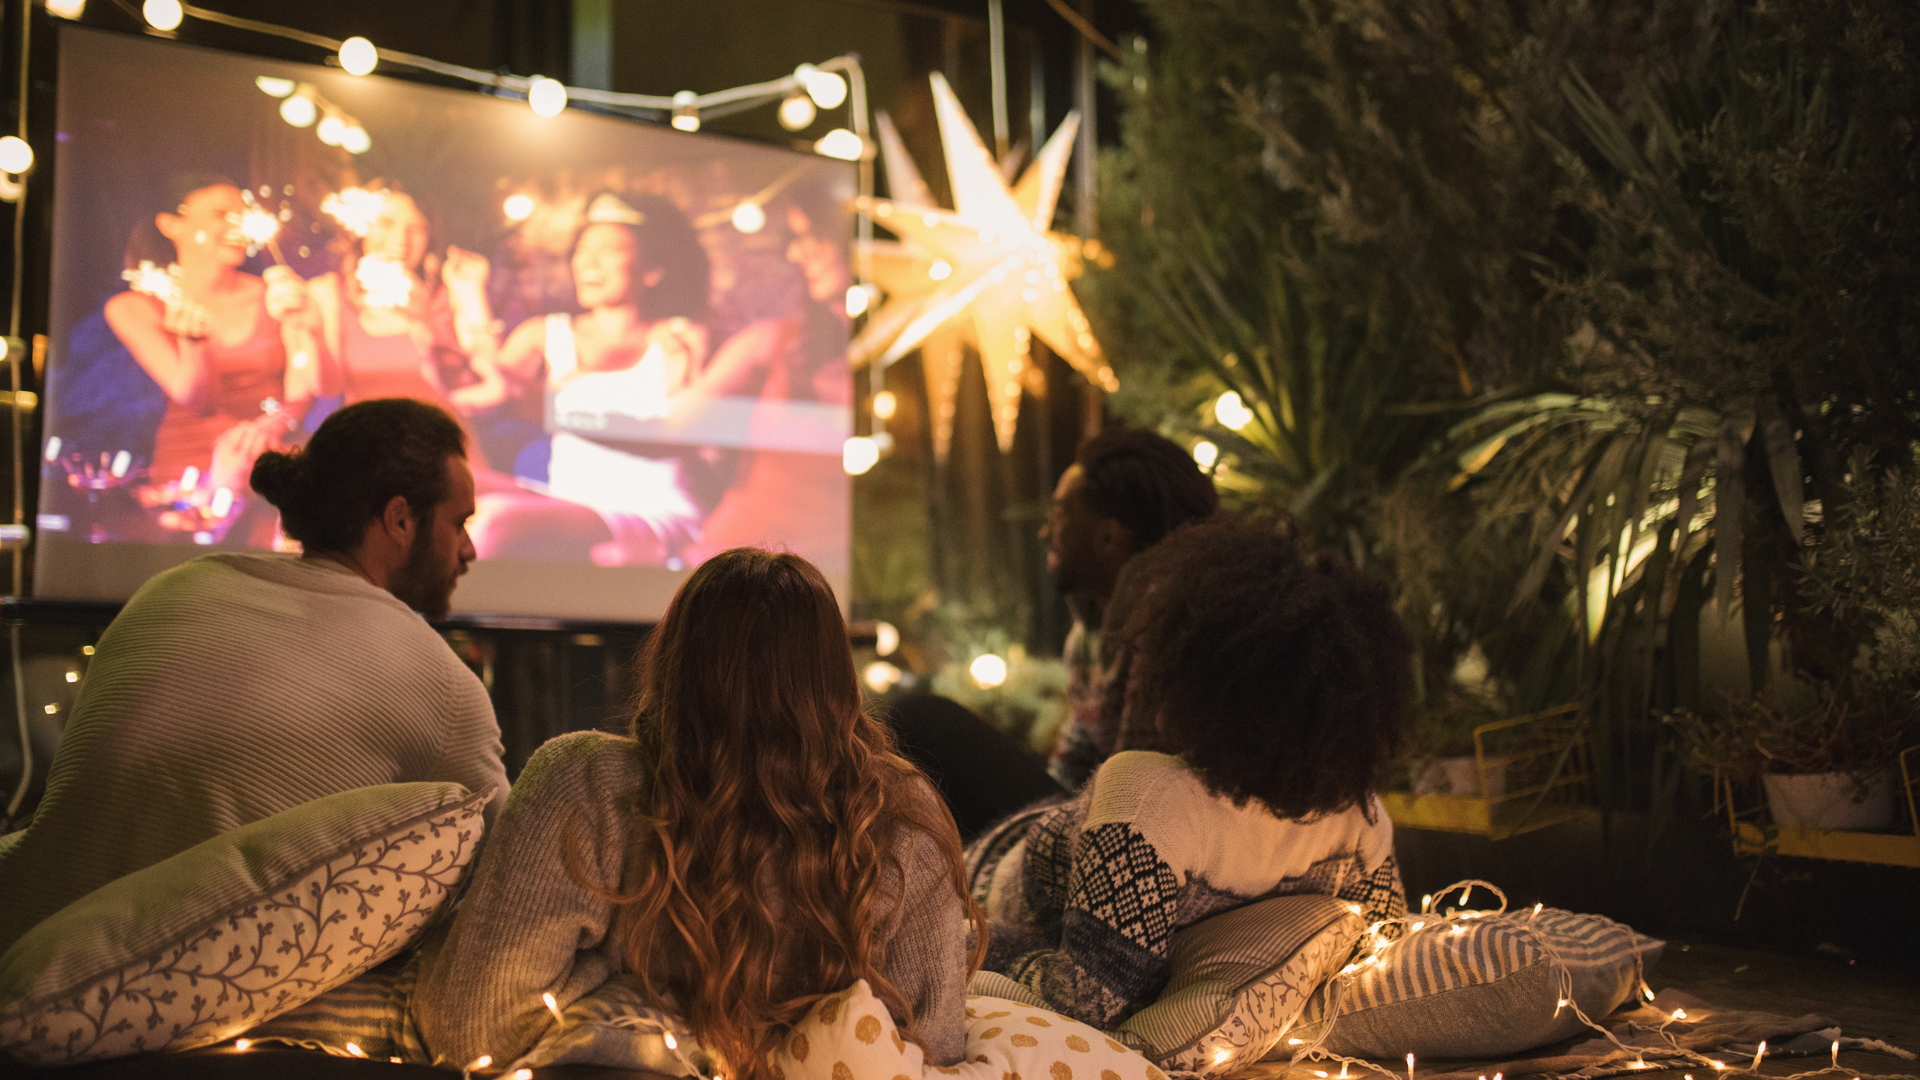 A group of friends watching a movie on a projector screen in their backyard.